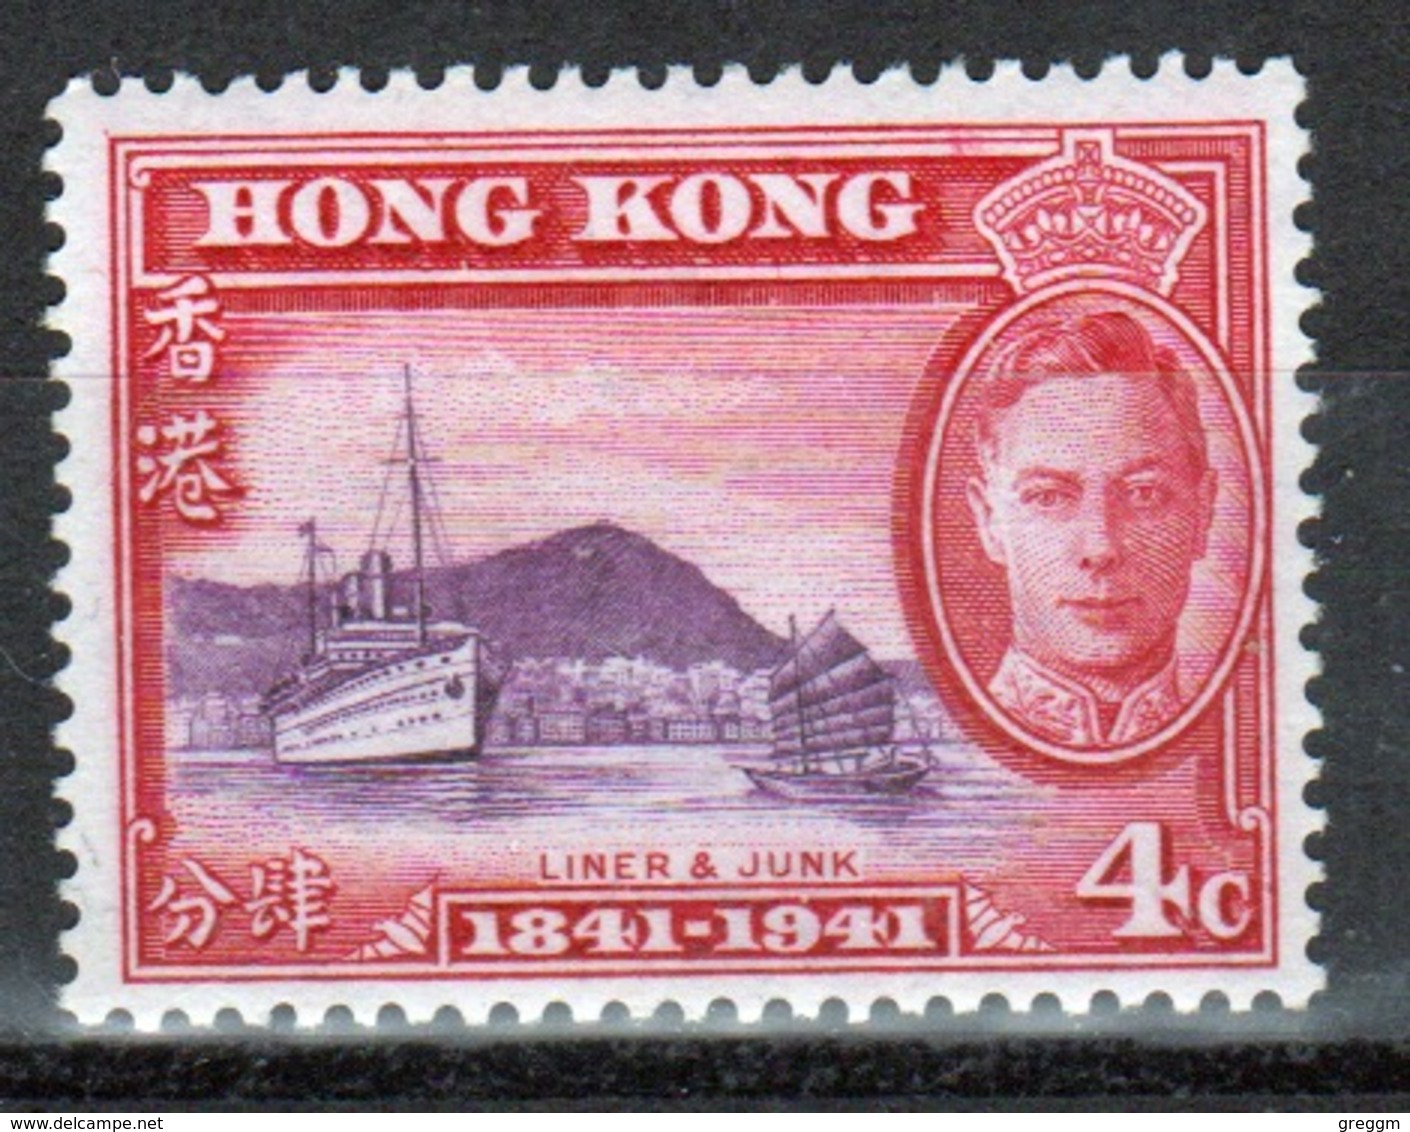 Hong Kong 1941 A 4 Cent Stamp To Celebrate Centenary Of British Occupation. - Unused Stamps